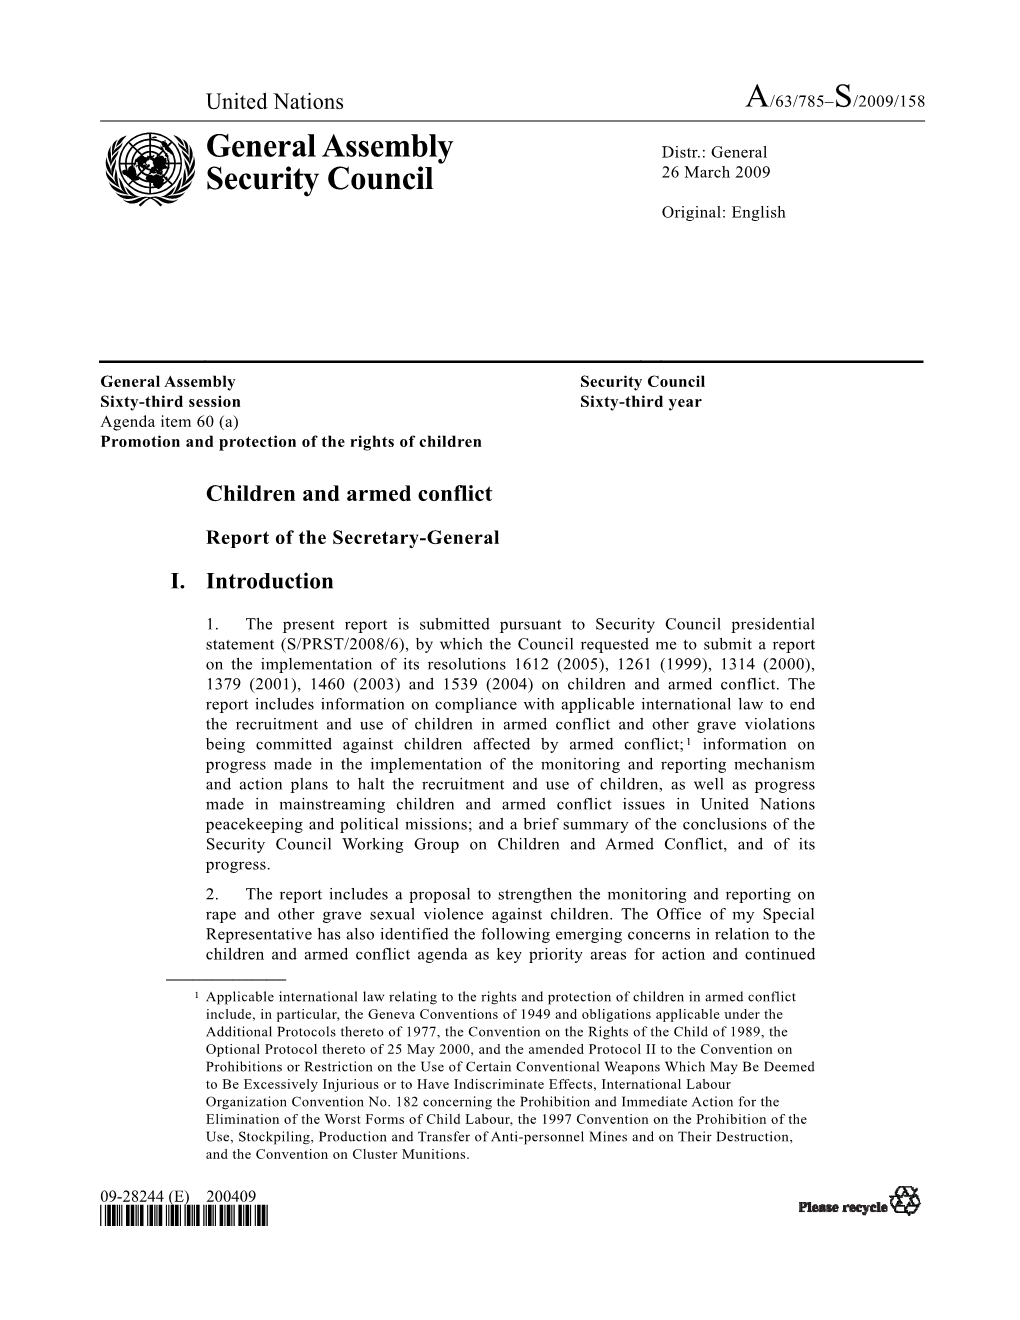 General Assembly Security Council Sixty-Third Session Sixty-Third Year Agenda Item 60 (A) Promotion and Protection of the Rights of Children